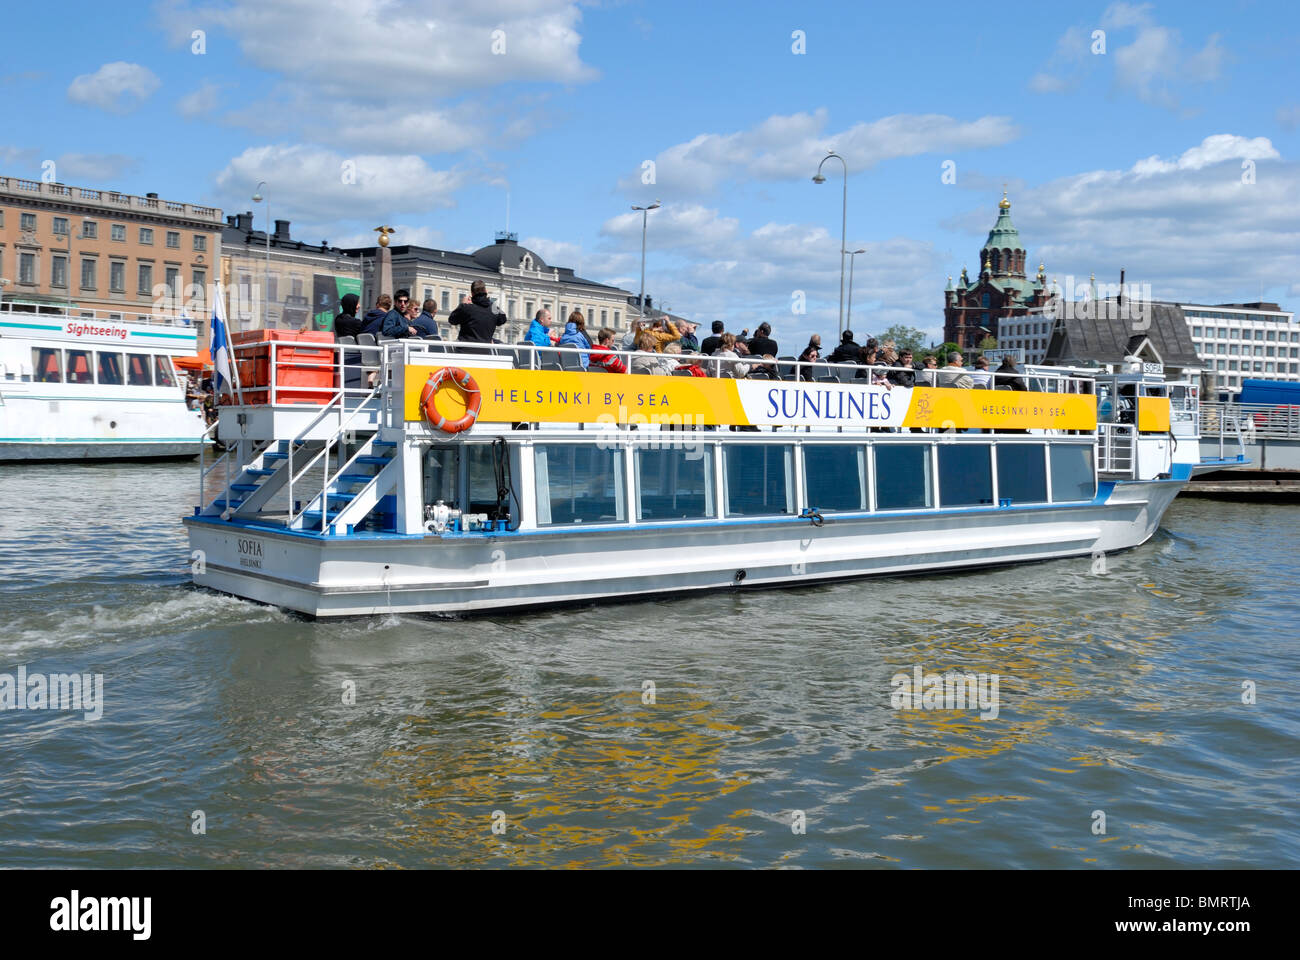 A sightseeing boat departures from the Kauppatori market square, Helsinki, Finland, Scandinavia, Europe. Stock Photo